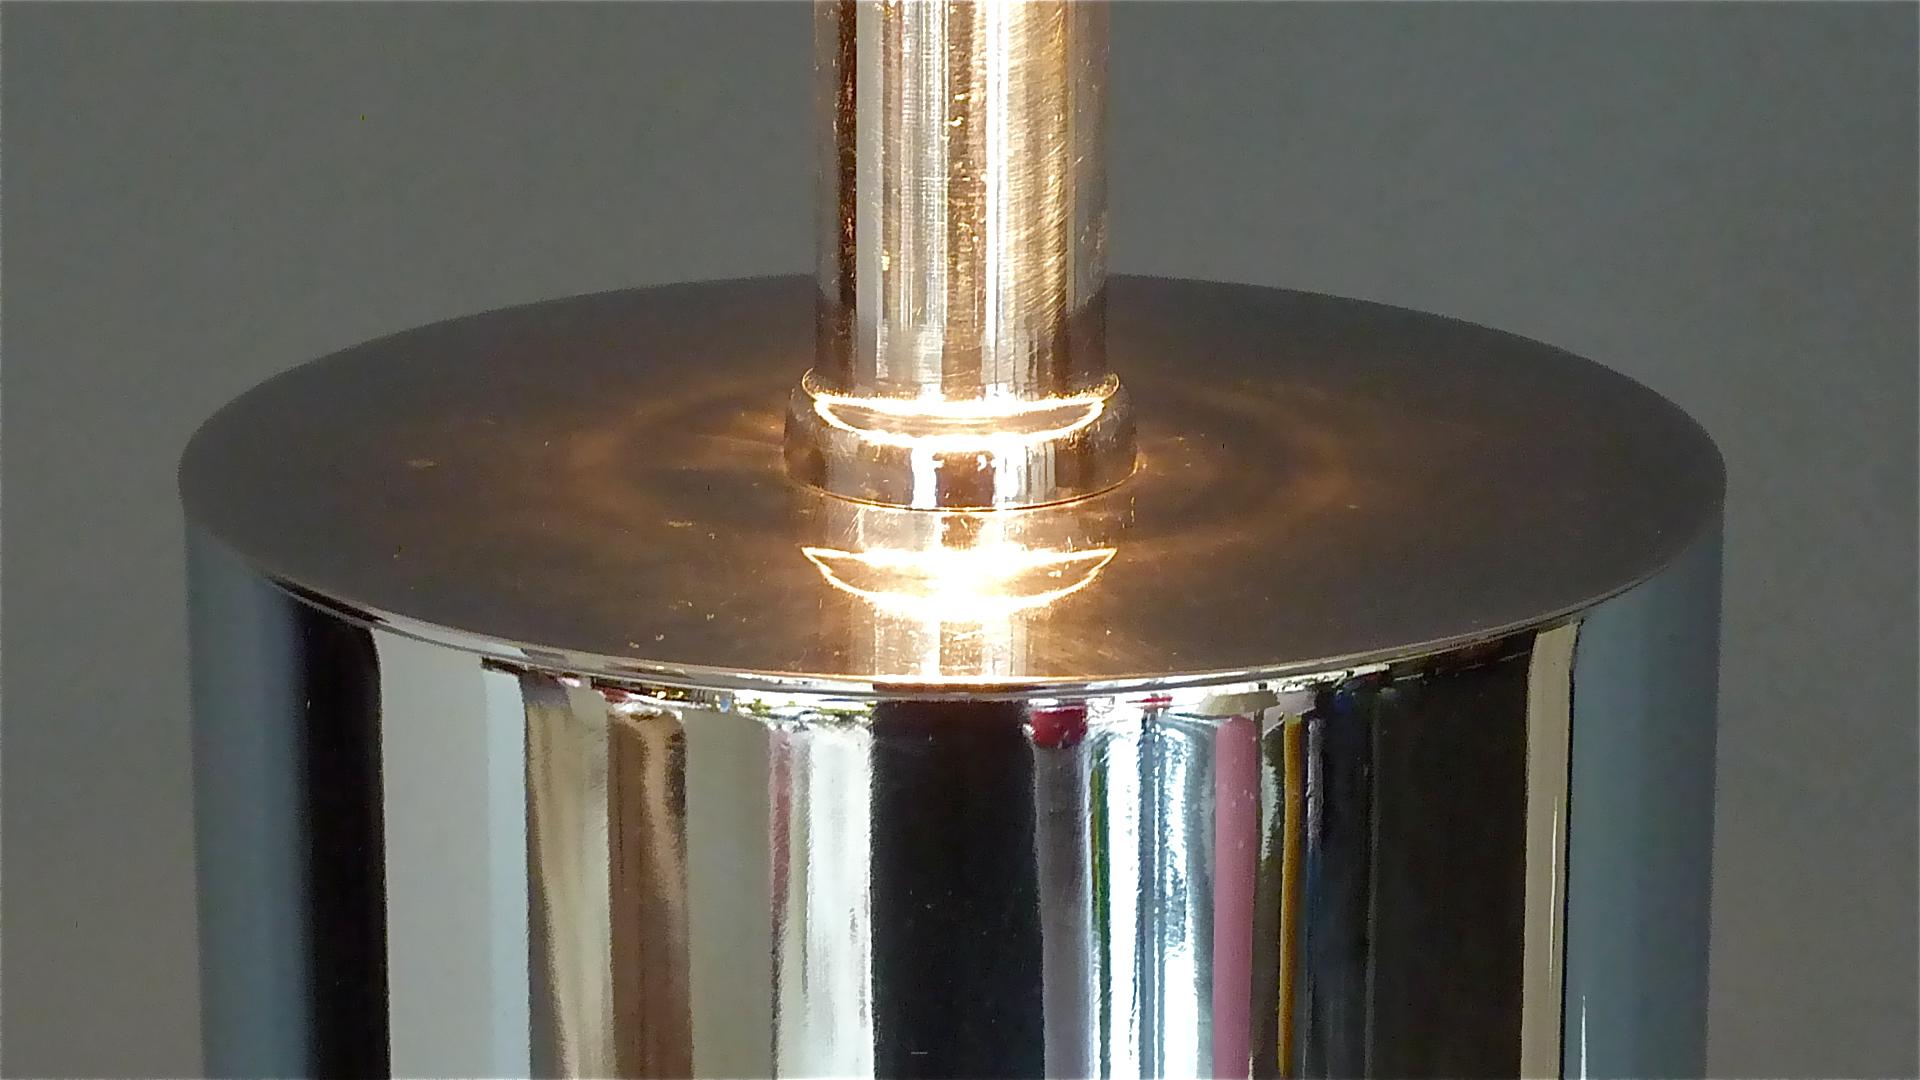 Monumental Chrome Steel Table Lamp Willy Rizzo Cardin Style Bronze Mirror 1970s For Sale 3